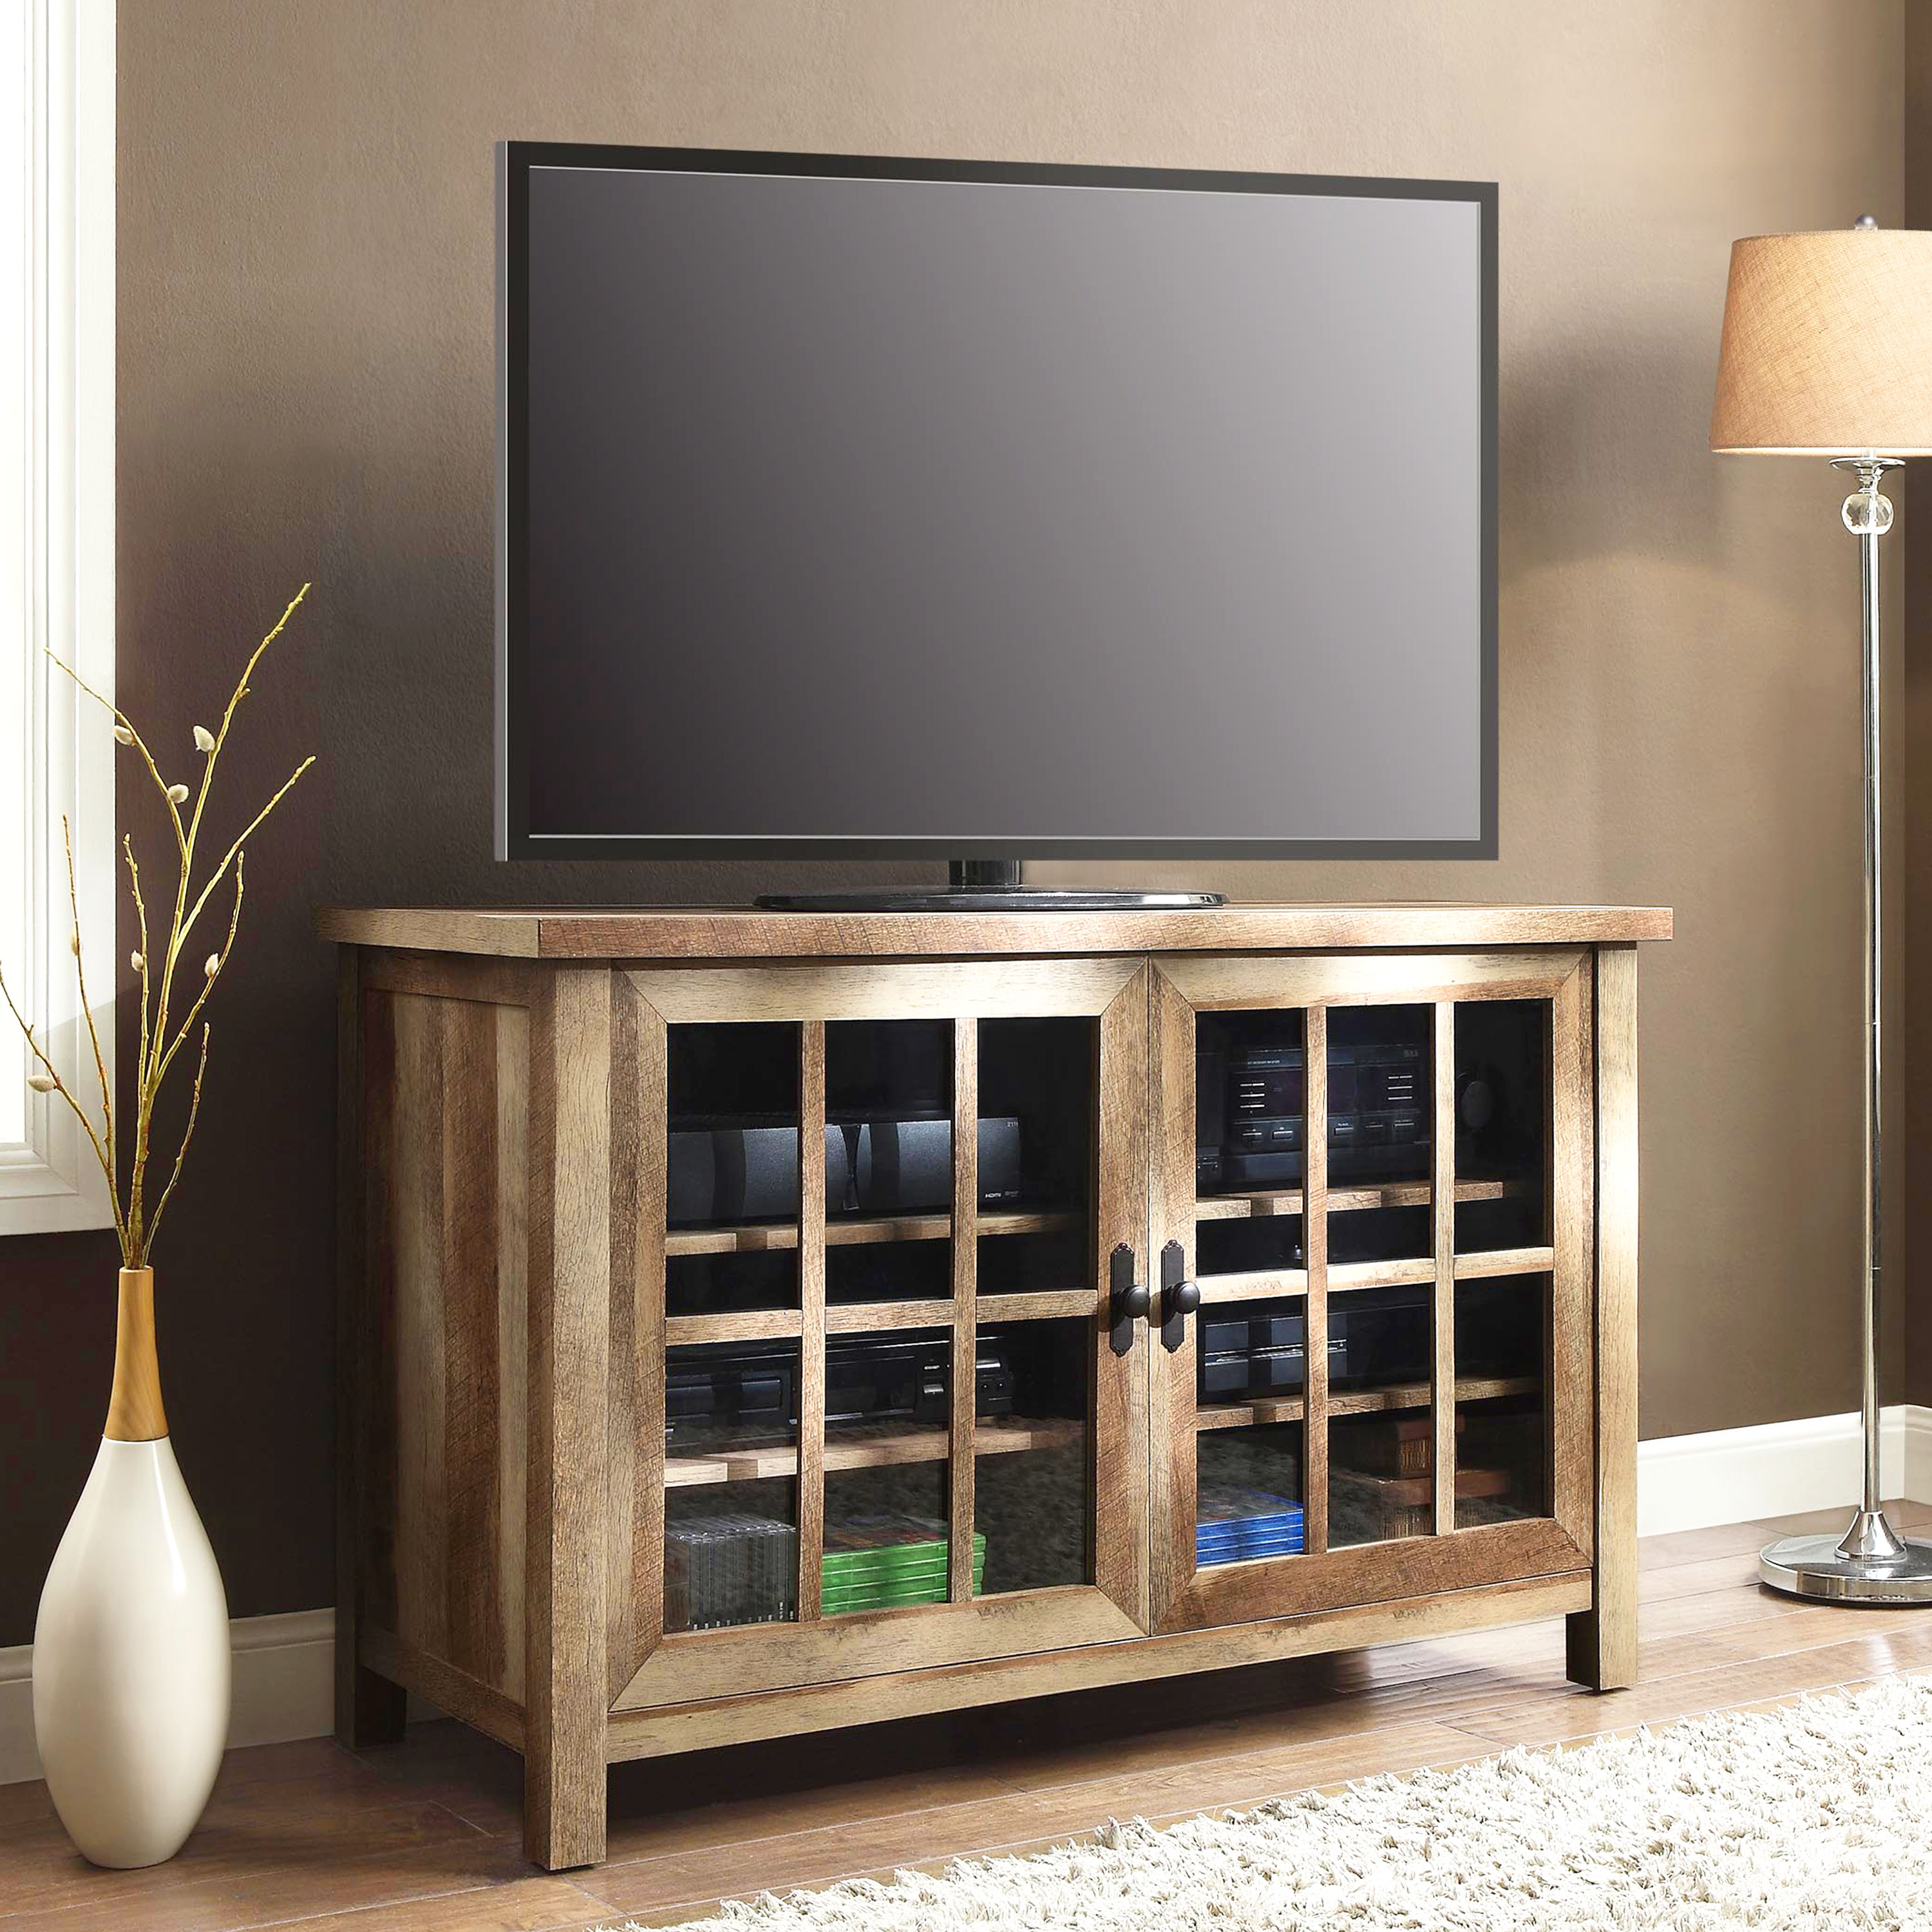 Better Homes & Gardens Oxford Square TV Stand for TVs up to 55", Rustic Brown - image 1 of 12